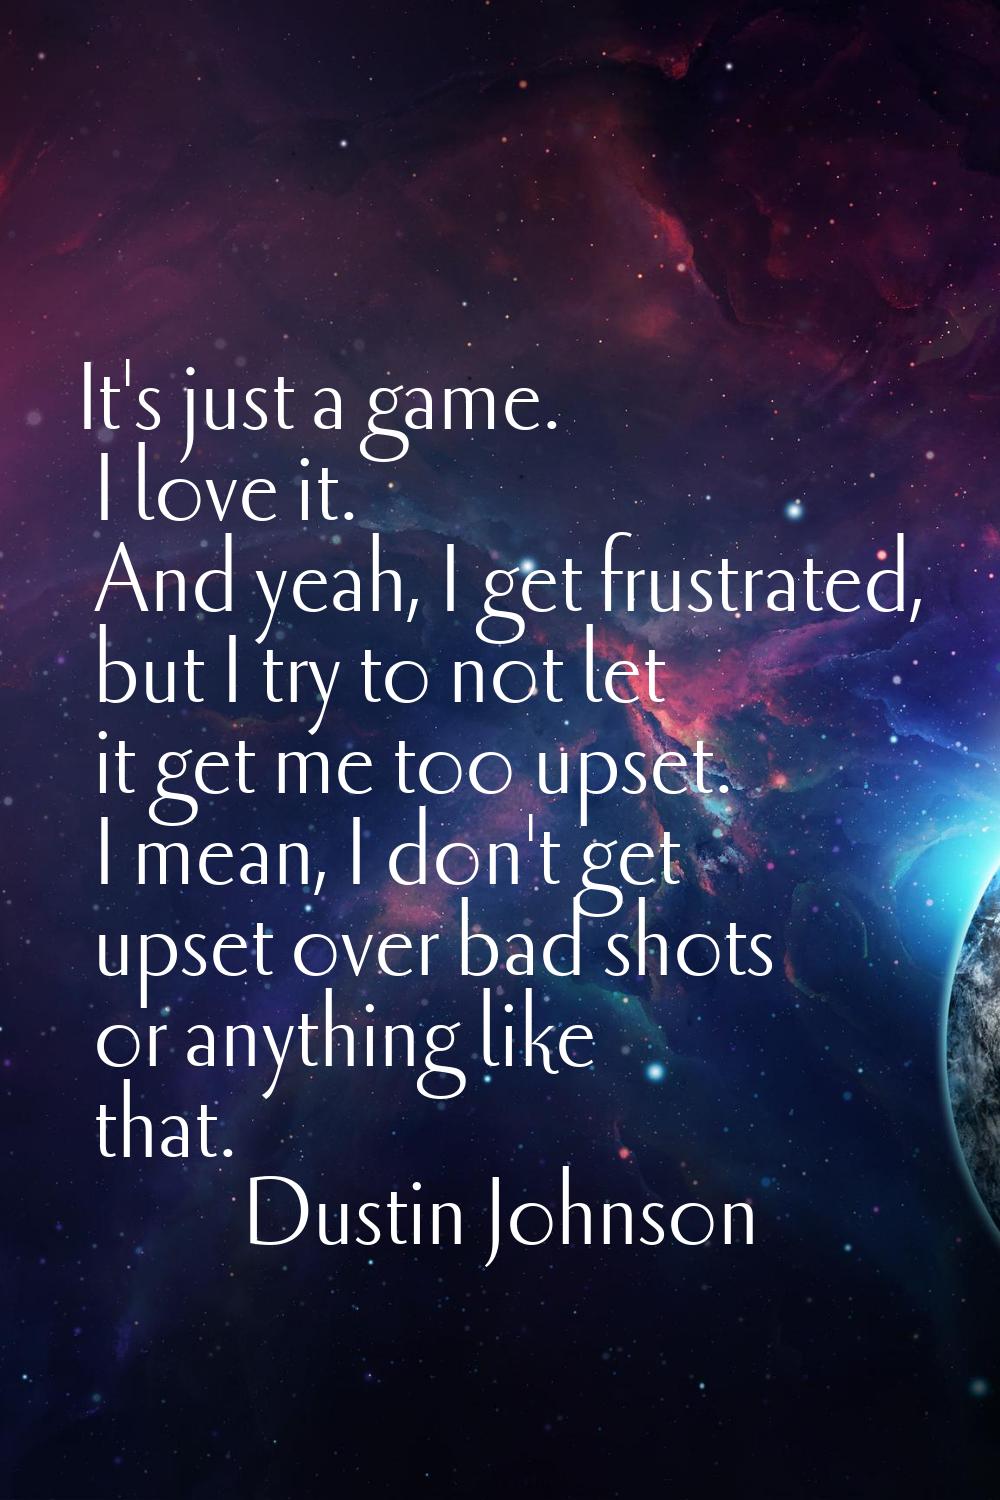 It's just a game. I love it. And yeah, I get frustrated, but I try to not let it get me too upset. 